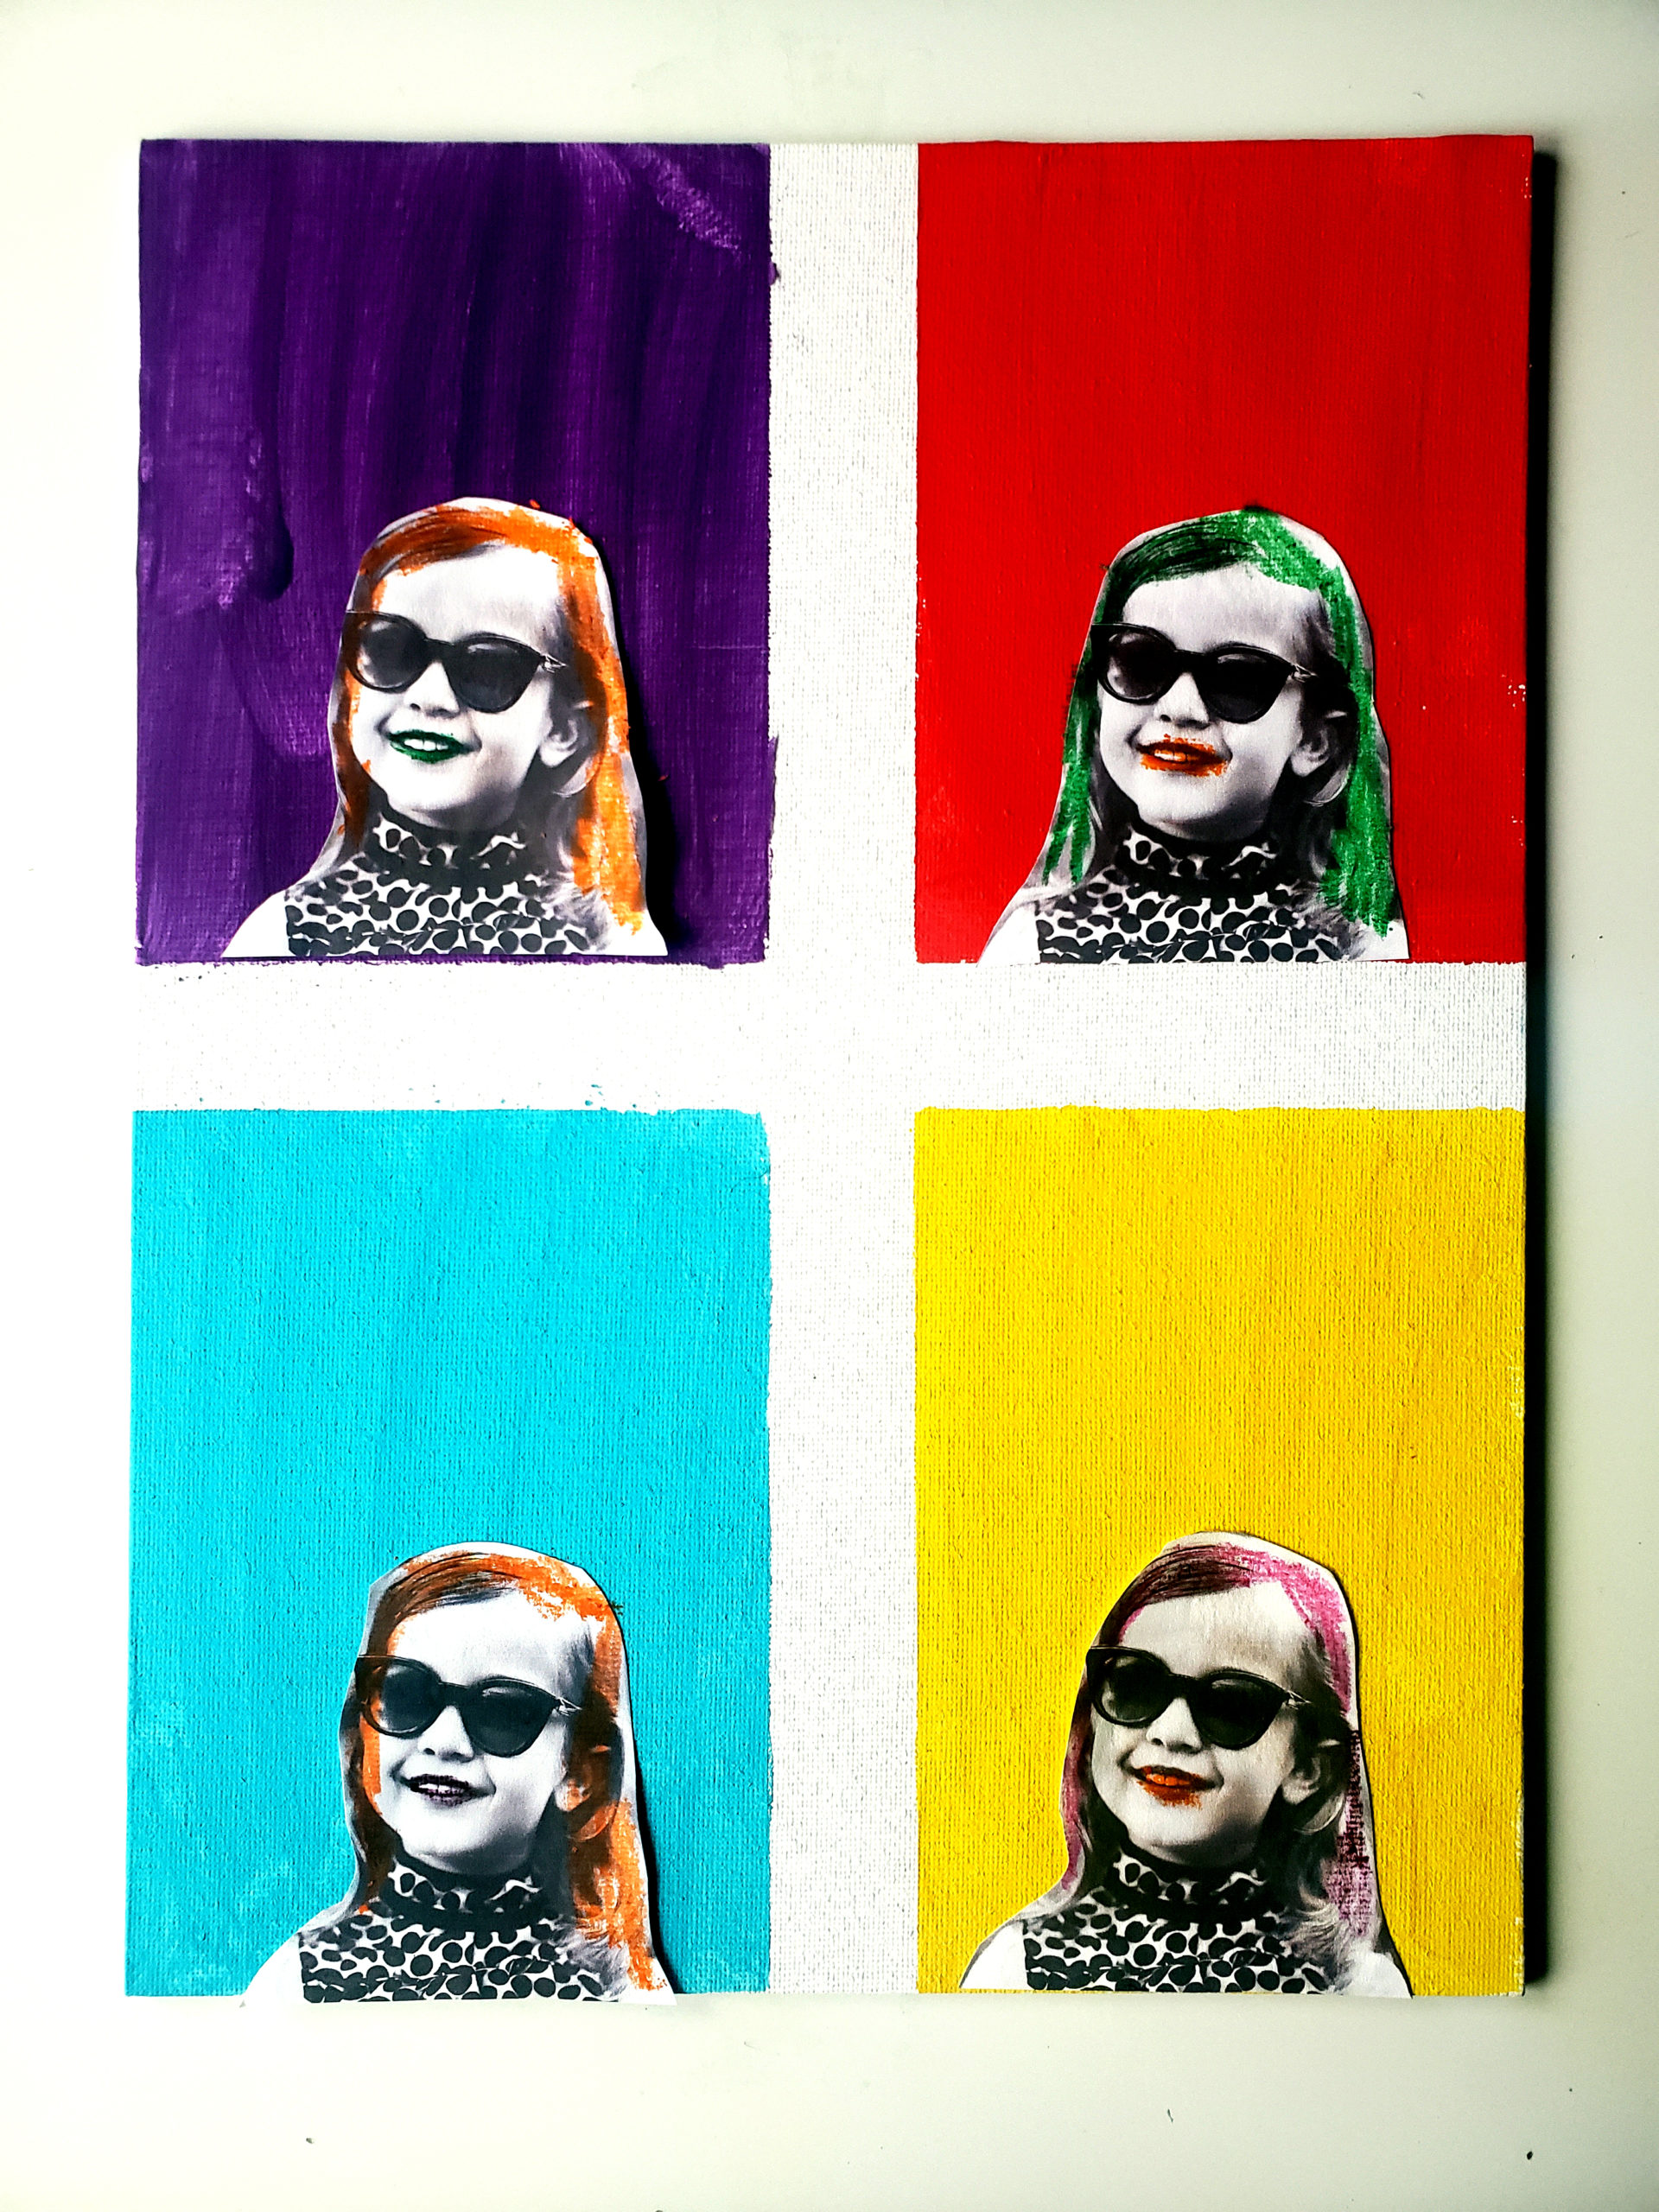 This Andy Warhol art project is perfect for elementary-level homeschoolers learning about 20th century American history or art history.